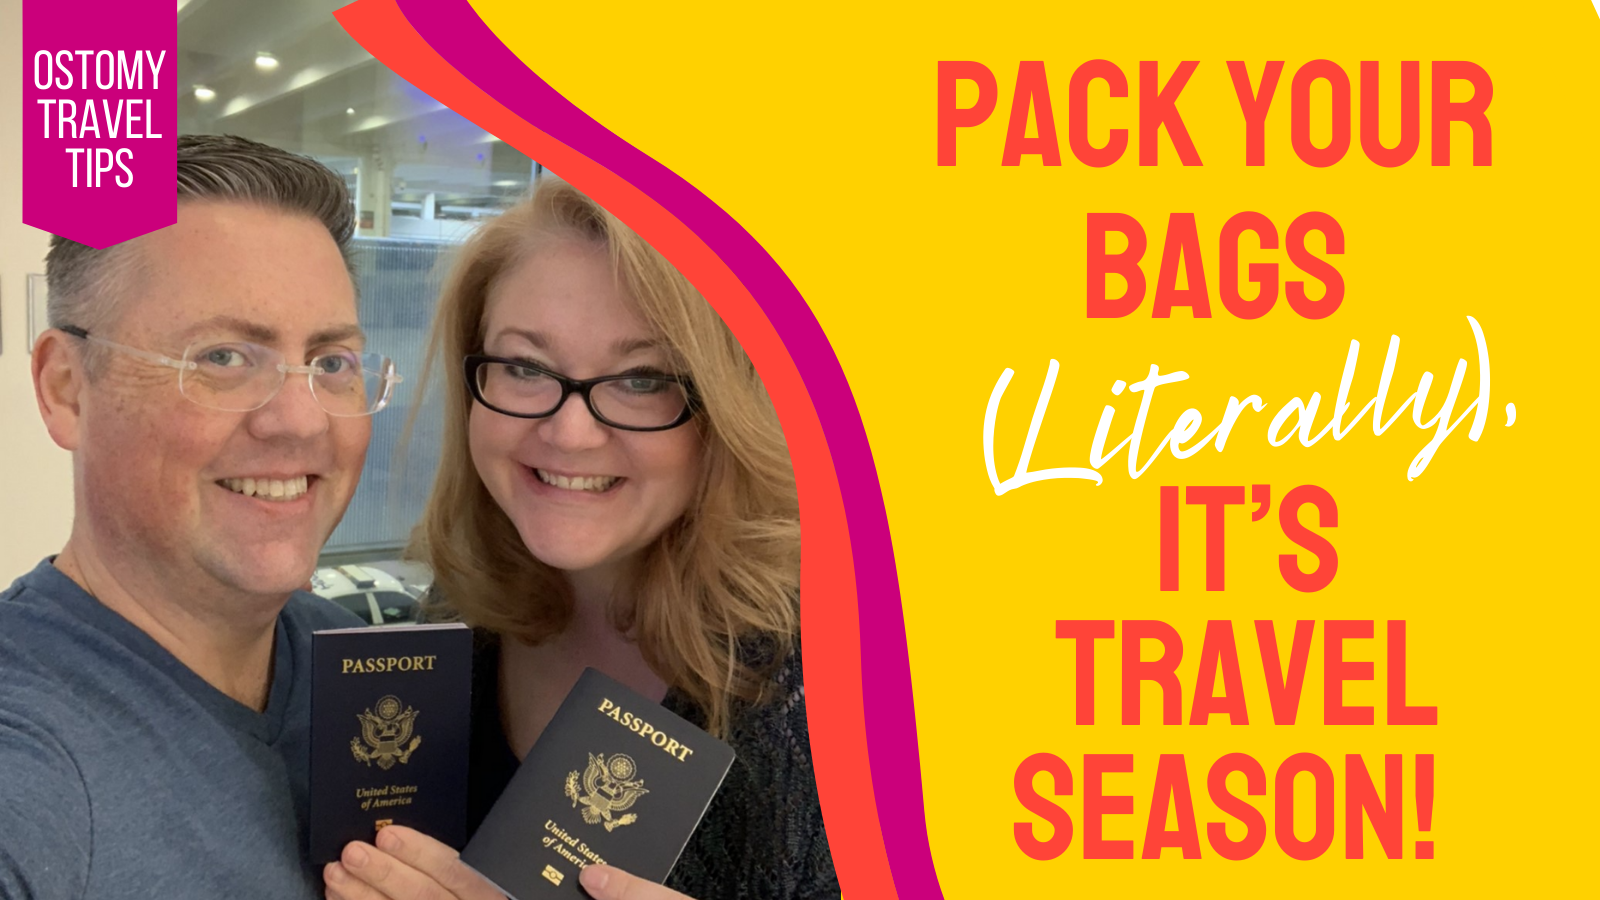 Pack Your Bags (Literally!), It’s Travel Season!